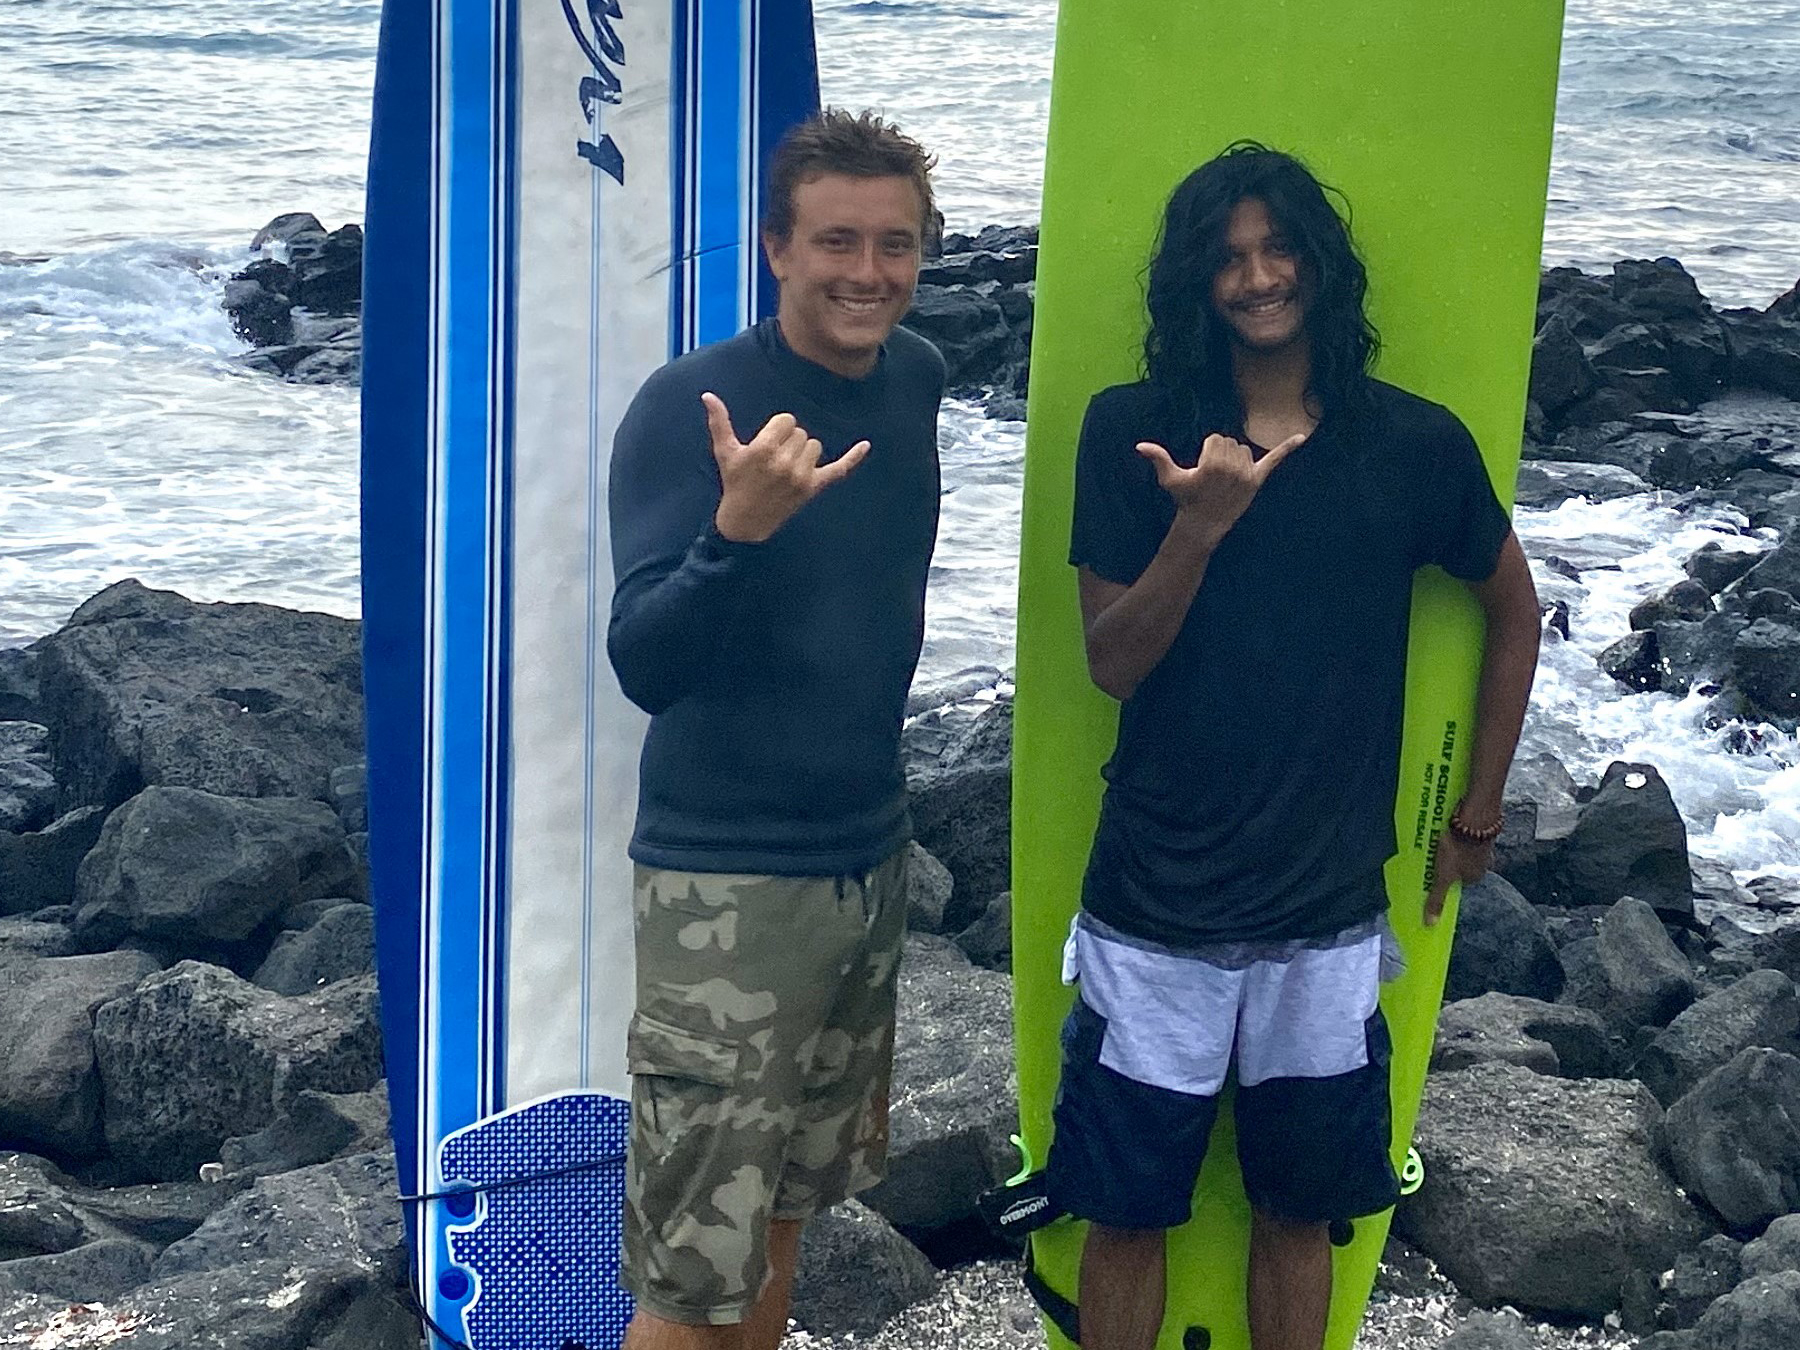 Surf instructor Kaleo with one student